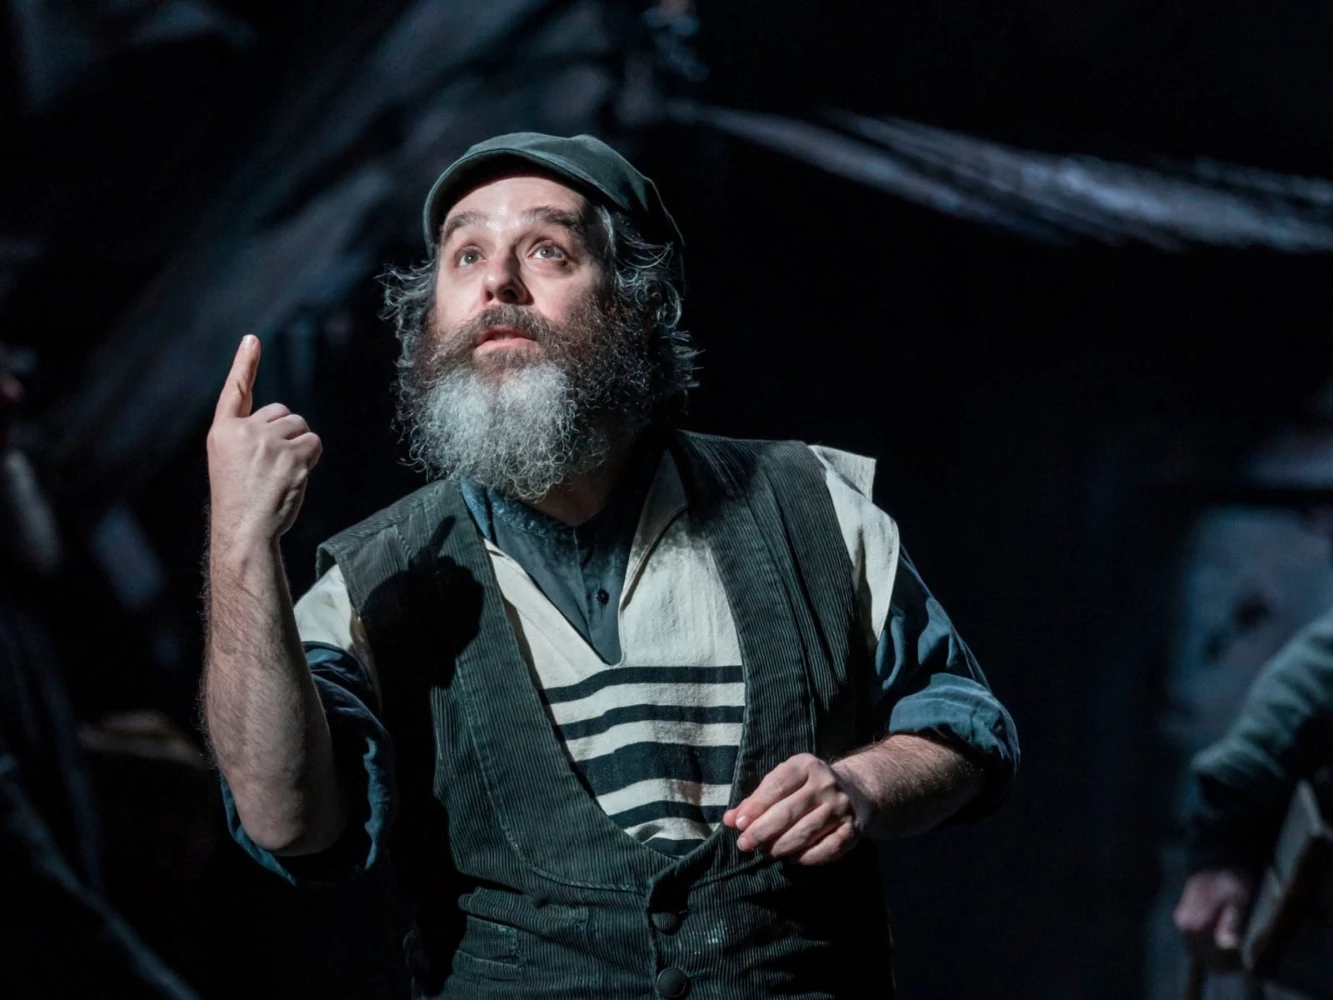 Fiddler on the Roof: What to expect - 2